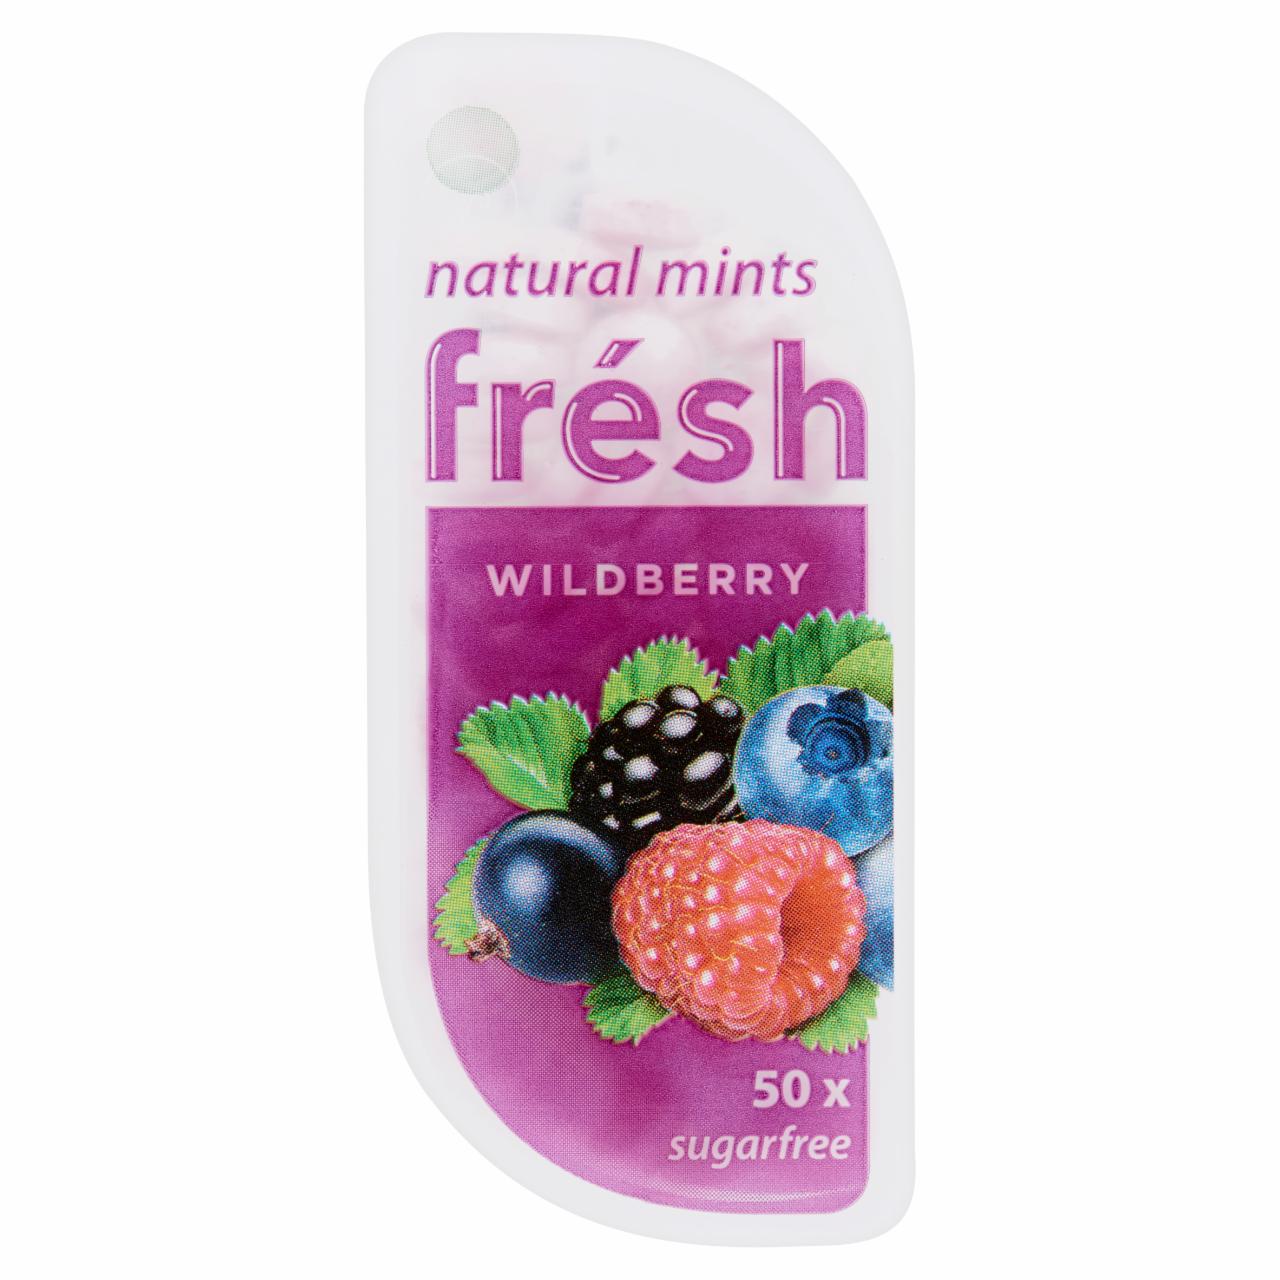 Photo - Frésh Sugar-Free Wildberry Flavoured Mouth and Breath Freshening Mints with Sweeteners 7 g